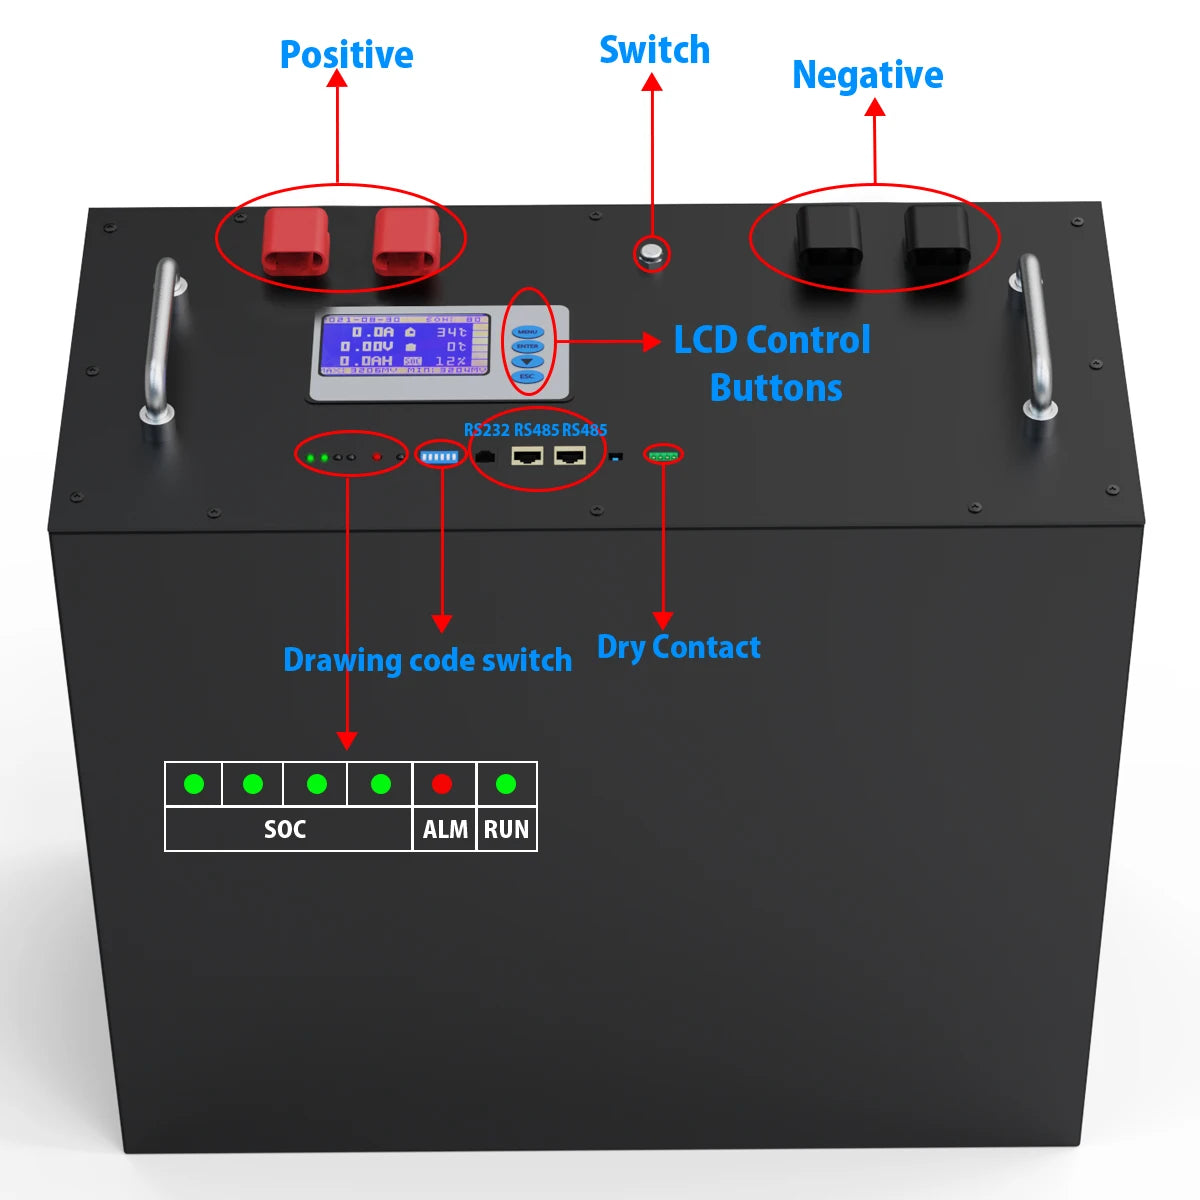 48V 230Ah 200Ah LiFePO4 Battery, Supports up to 32 parallel connections with intelligent monitoring, tracking cell temperatures and voltages.